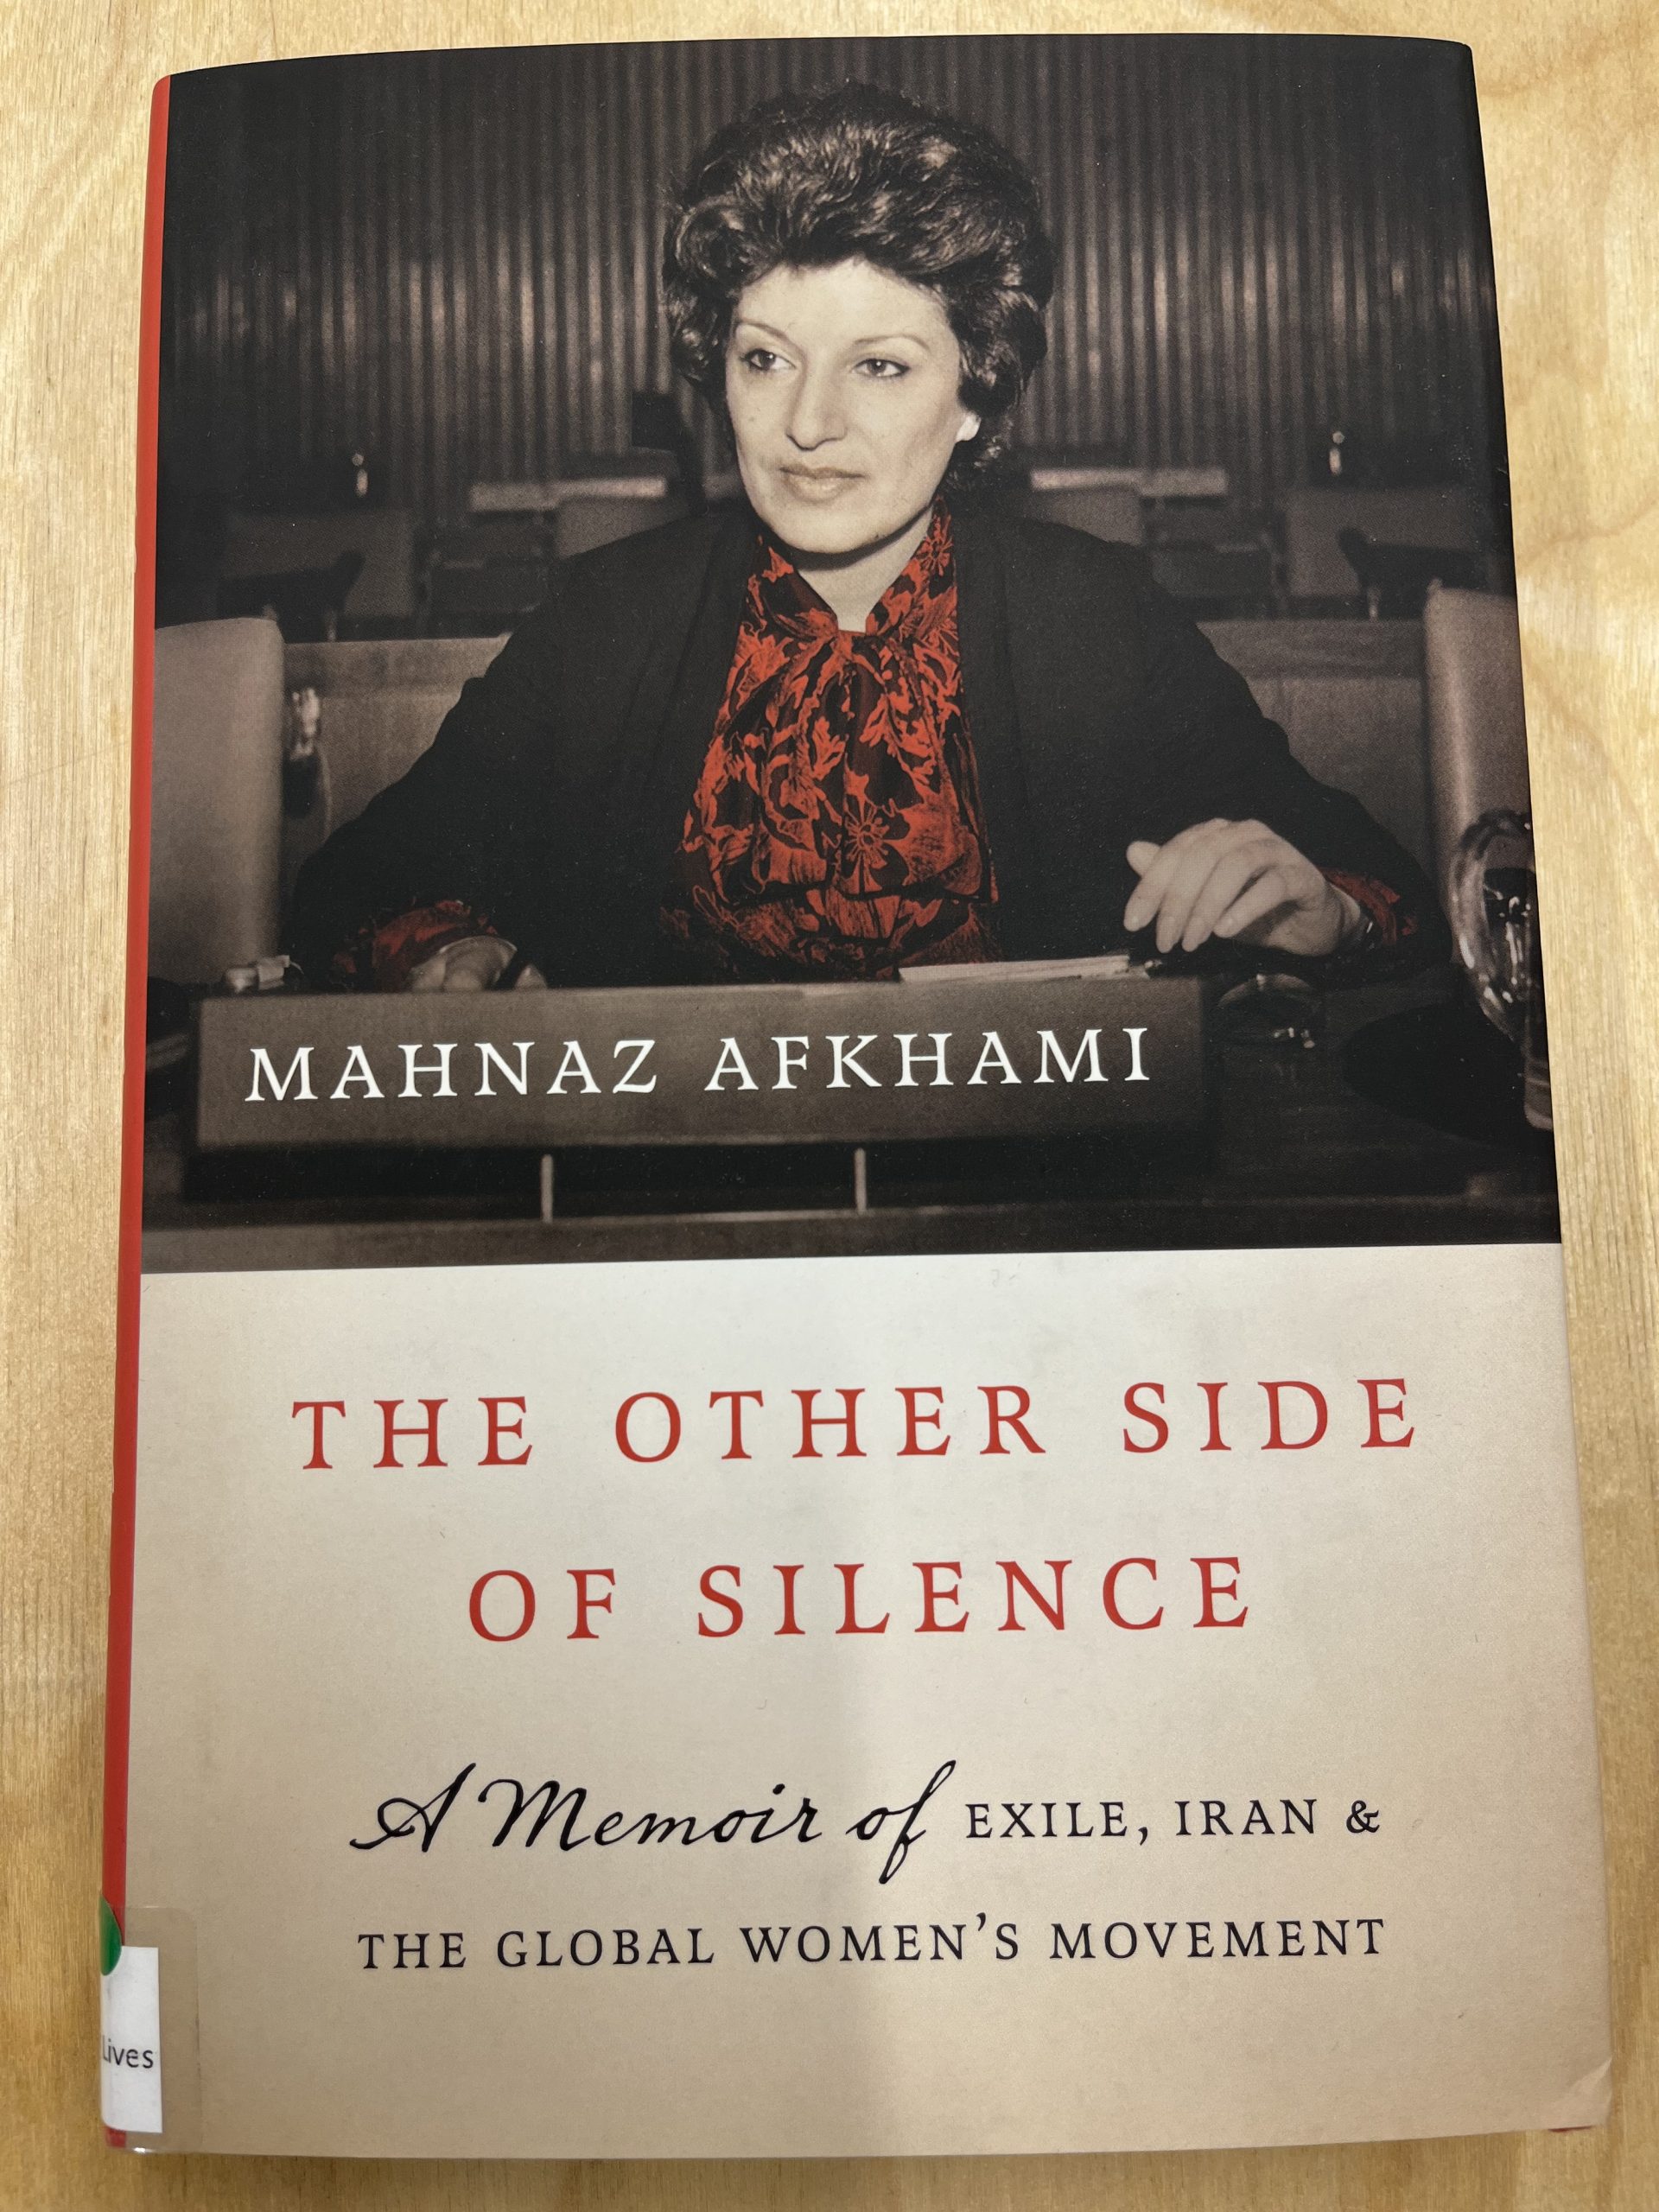 Image of book: The Other Side of Silence